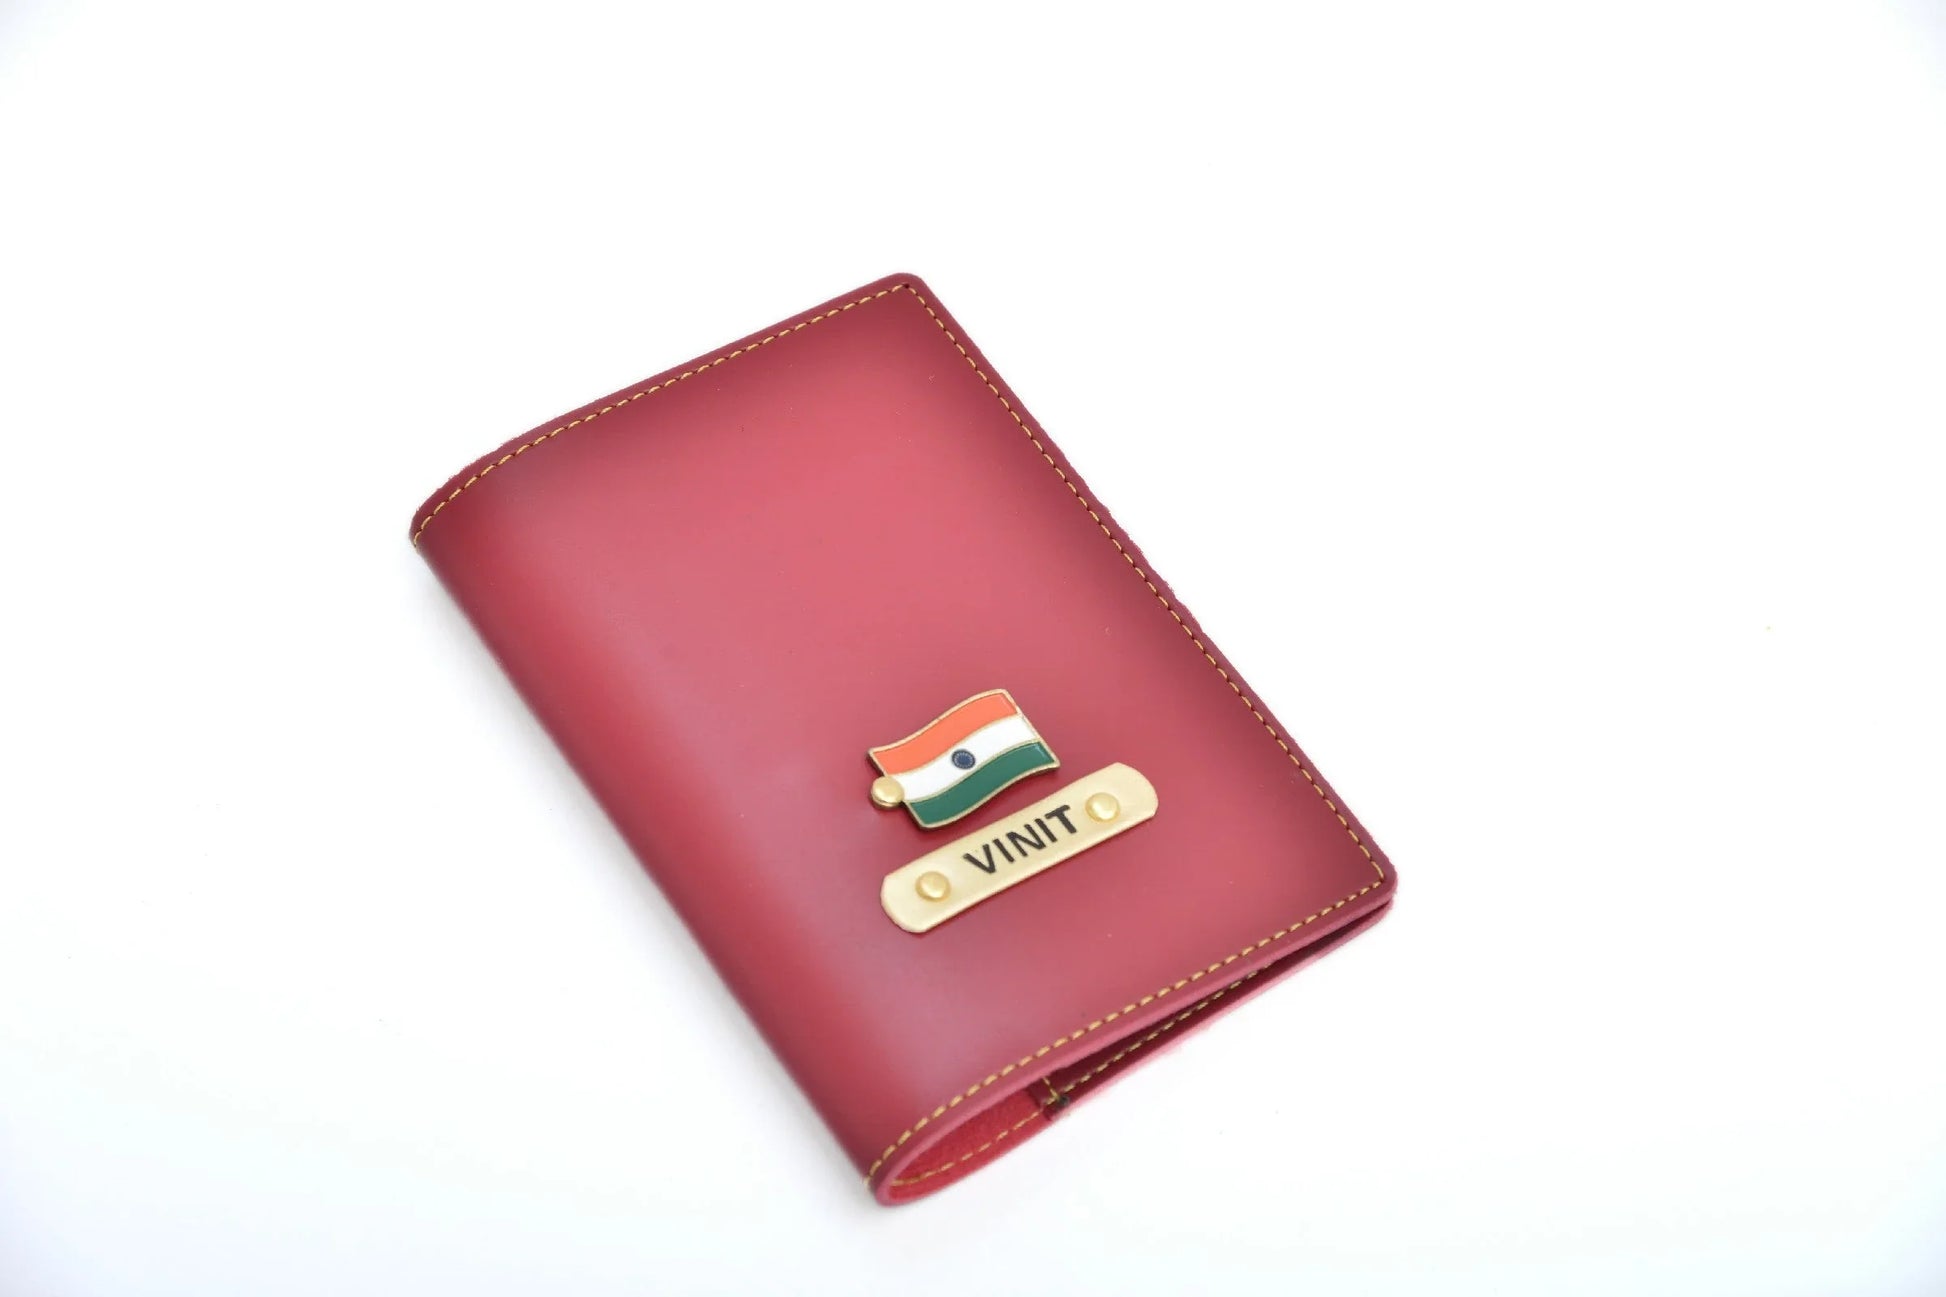 Presenting your custom-made leather passport cover with a splendid finish that makes your passport stand out! Not only is it good the see and touch, but also it protects your passport from all sorts of wear and tear. 